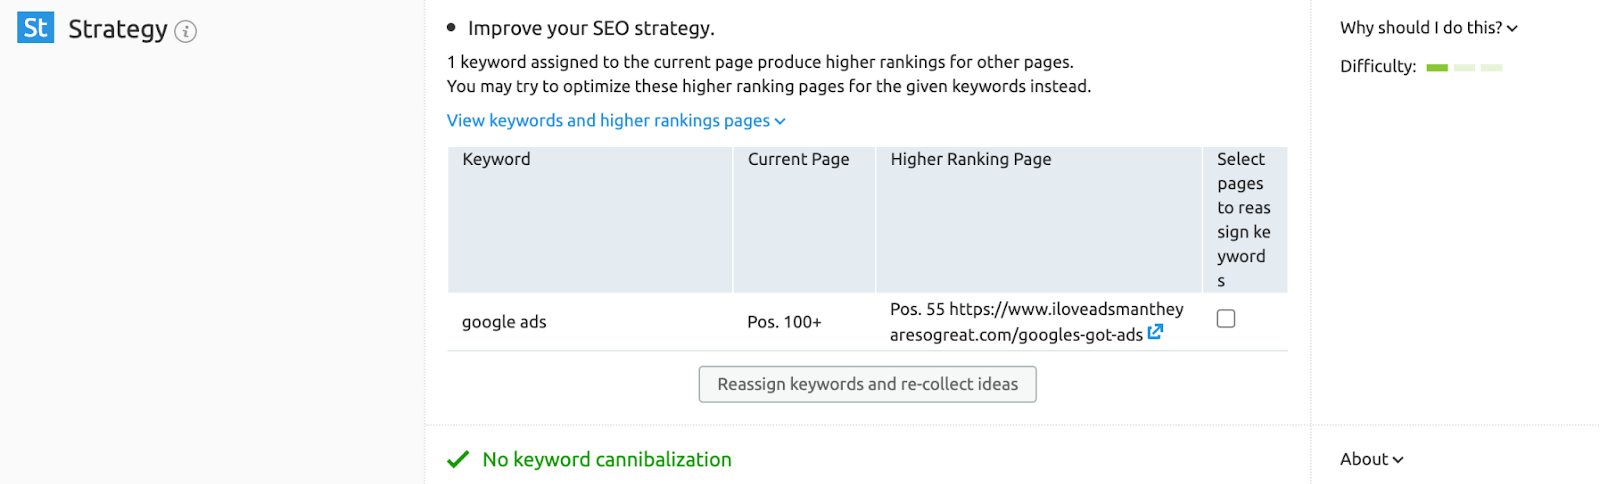 how to find seo ideas